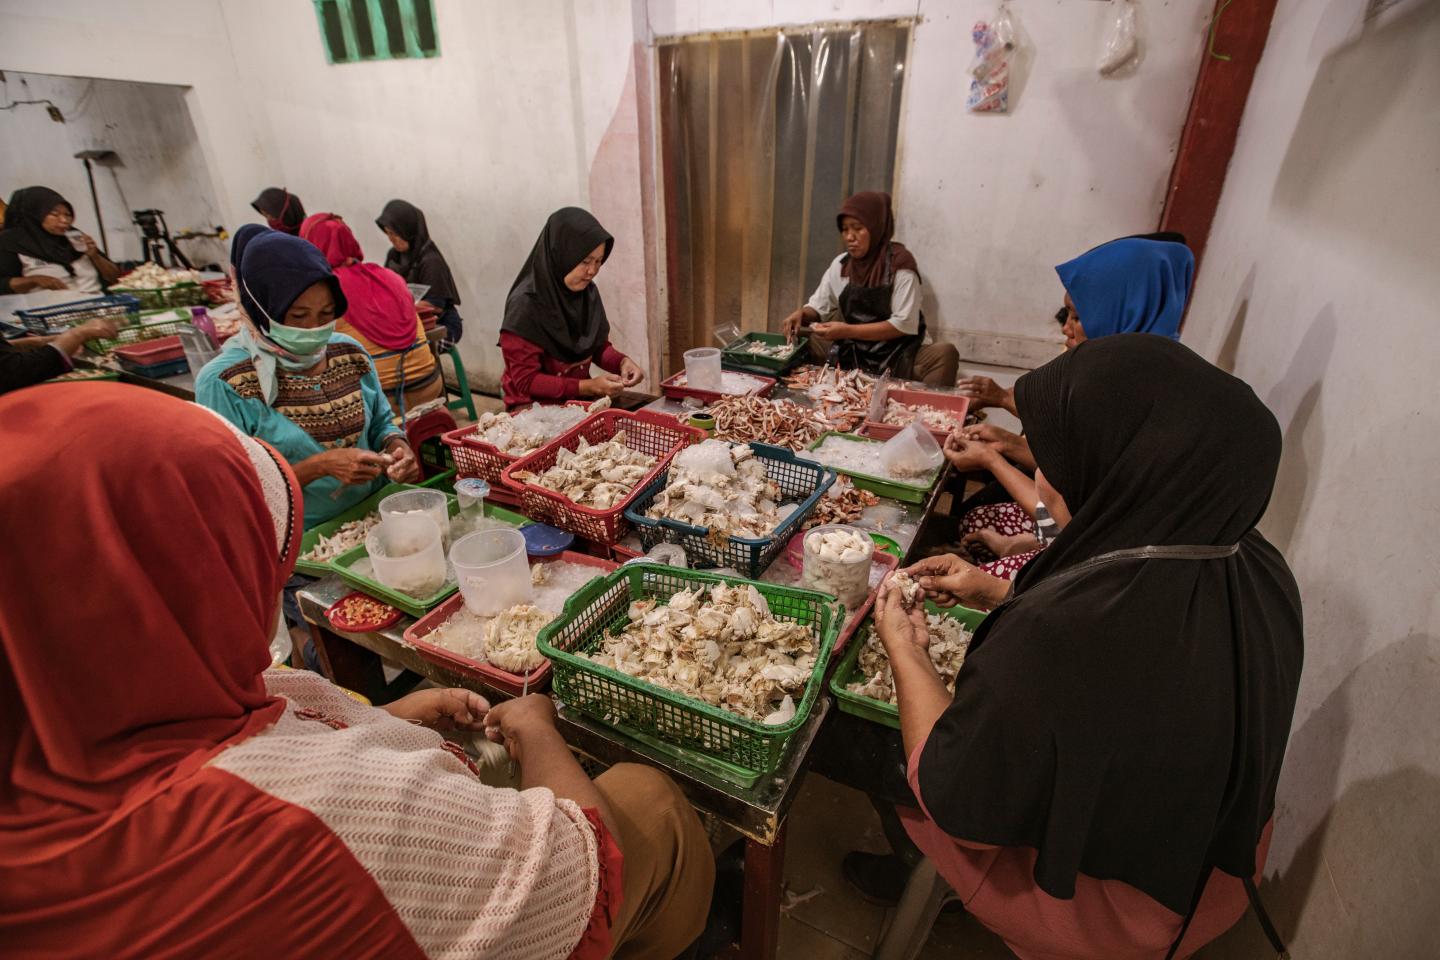 The Pendawi women’s group uses the fat of blue swimming crabs to make highly nutritious crackers and other snacks